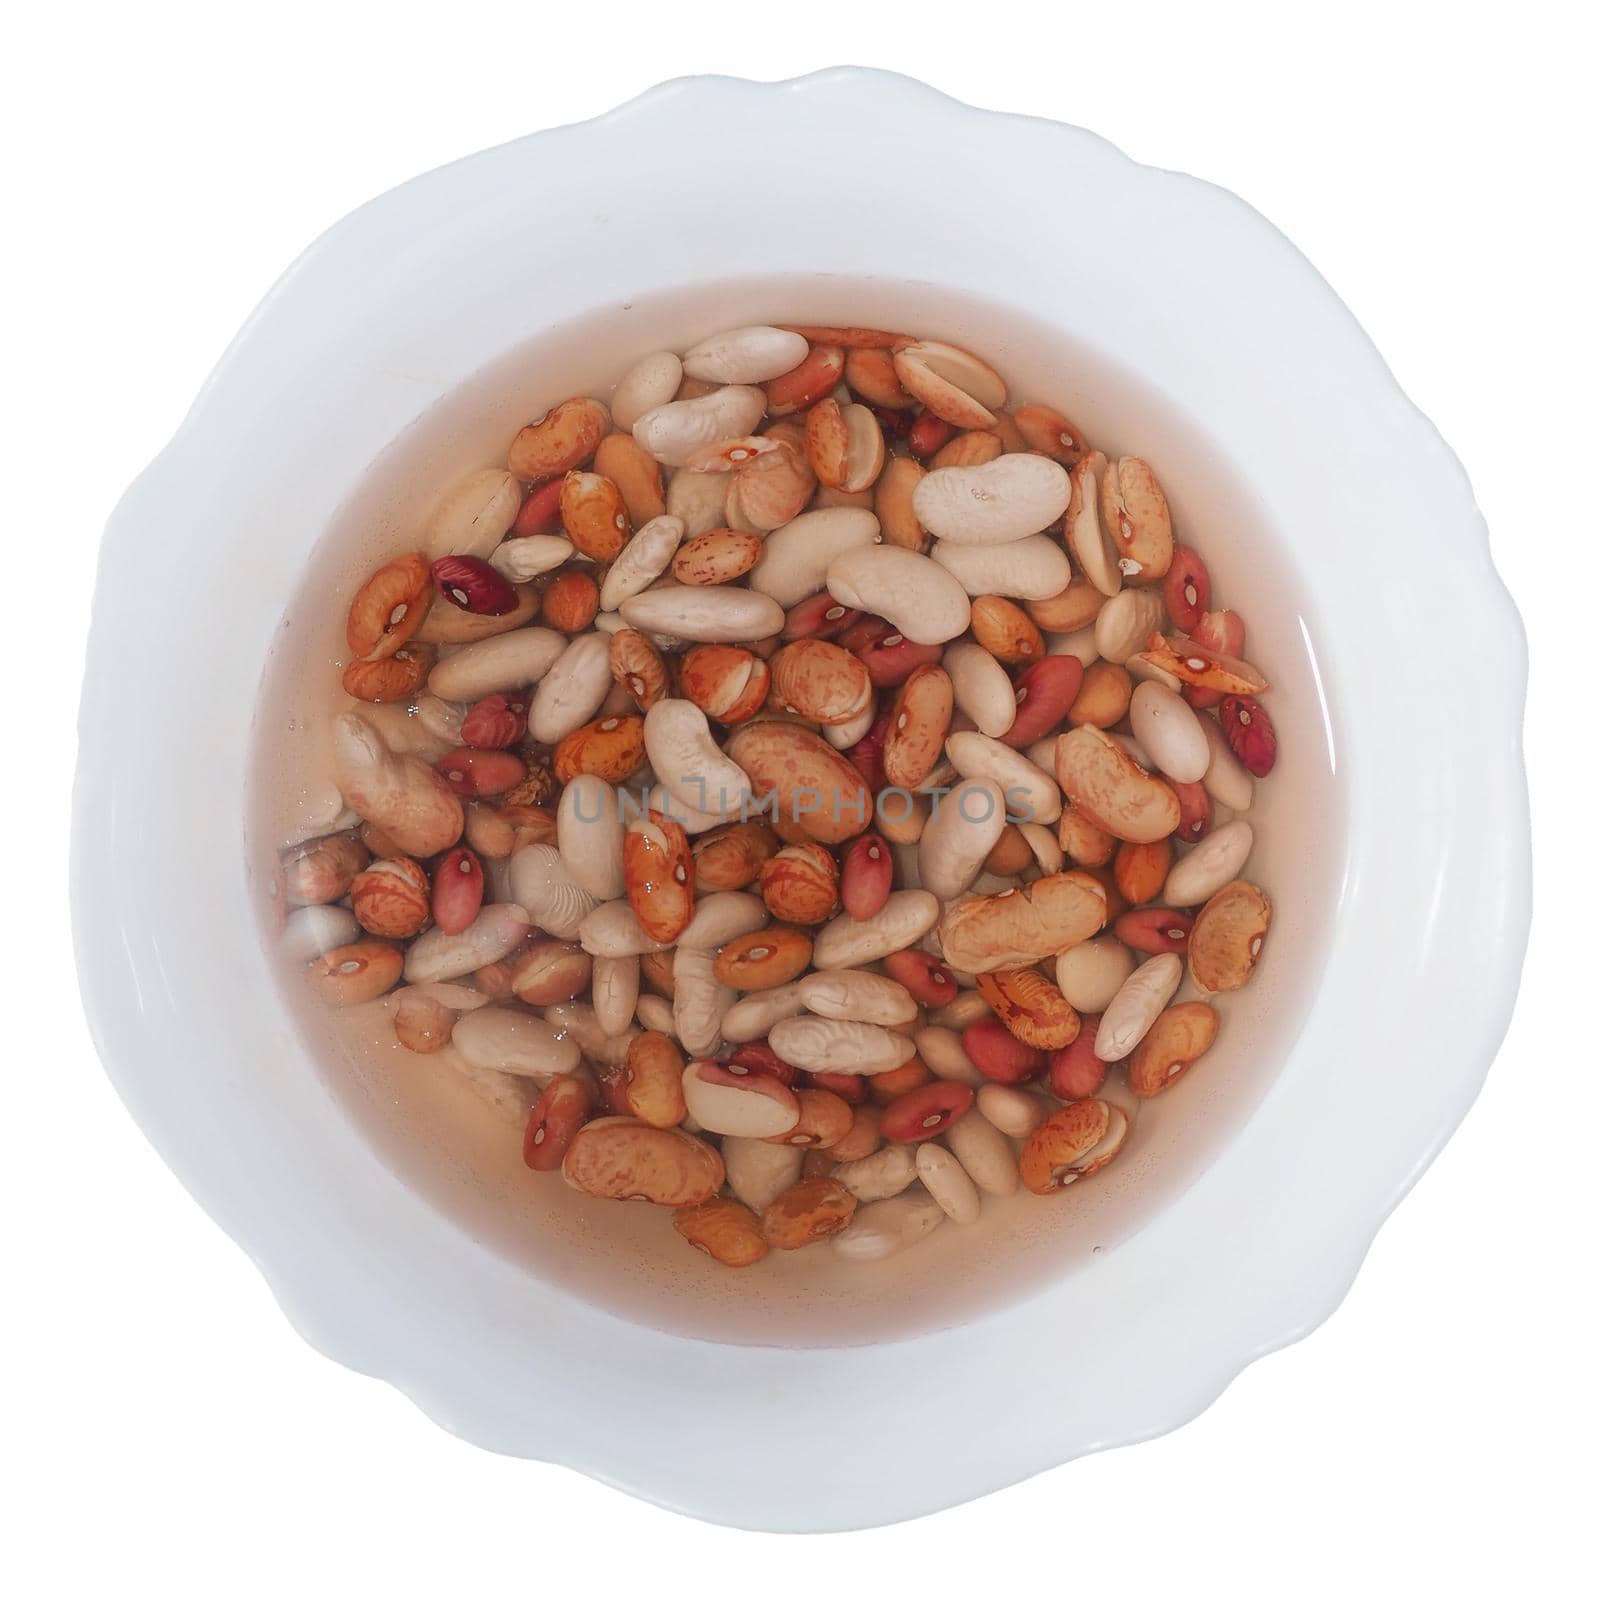 mixed beans including crimson, cannellini and red kidney beans in a bowl of water isolated over white background